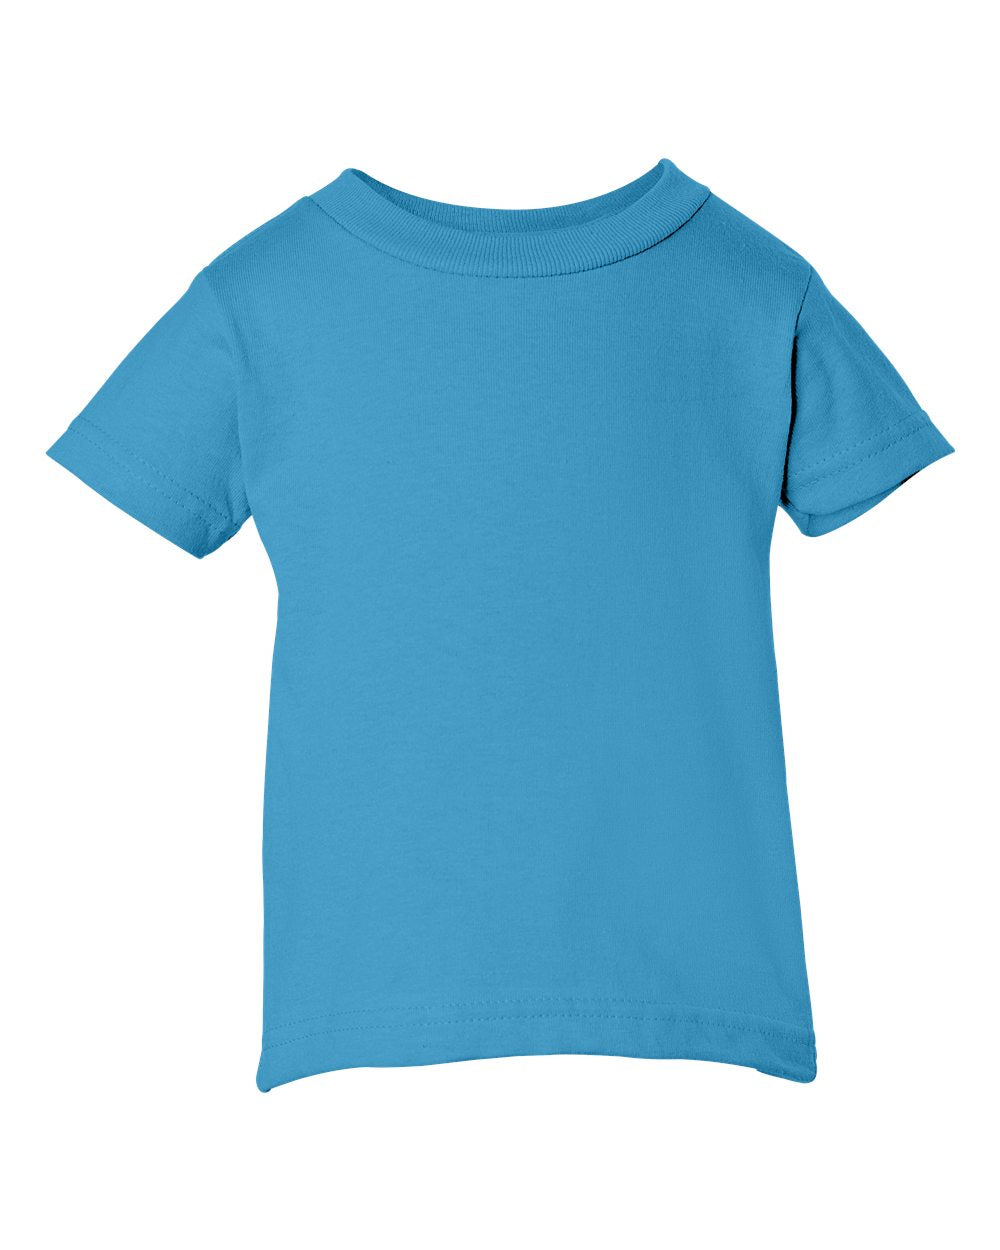 rabbit skins infant cotton jersey tee turquoise